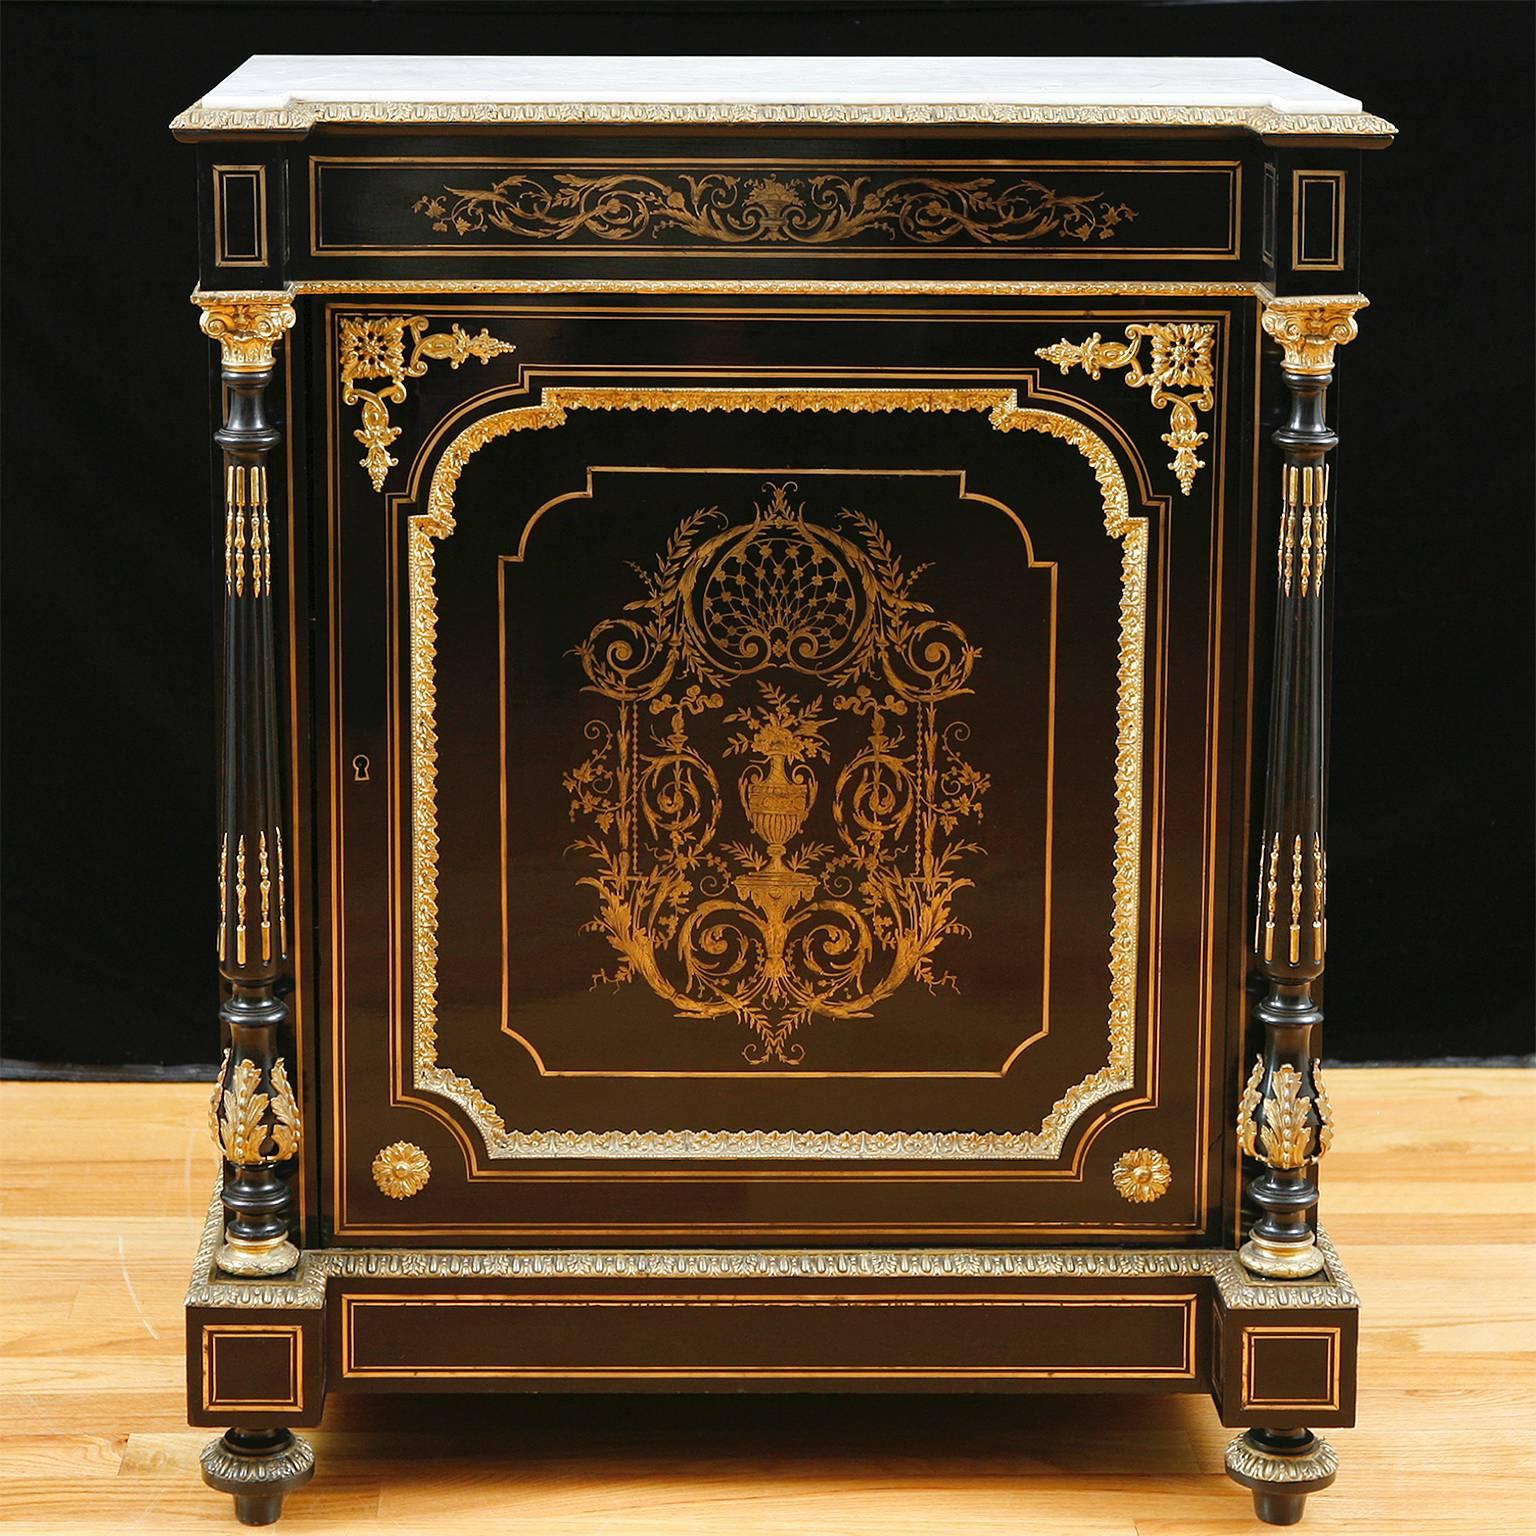 A superb Napoleon III Boulle cabinet in ebonized wood with very fine inlays in silver and brass on frieze and door panel, original white marble top, turned columns mounted with ormolu and topped with brass capitals, France, circa 1870.
Measures: